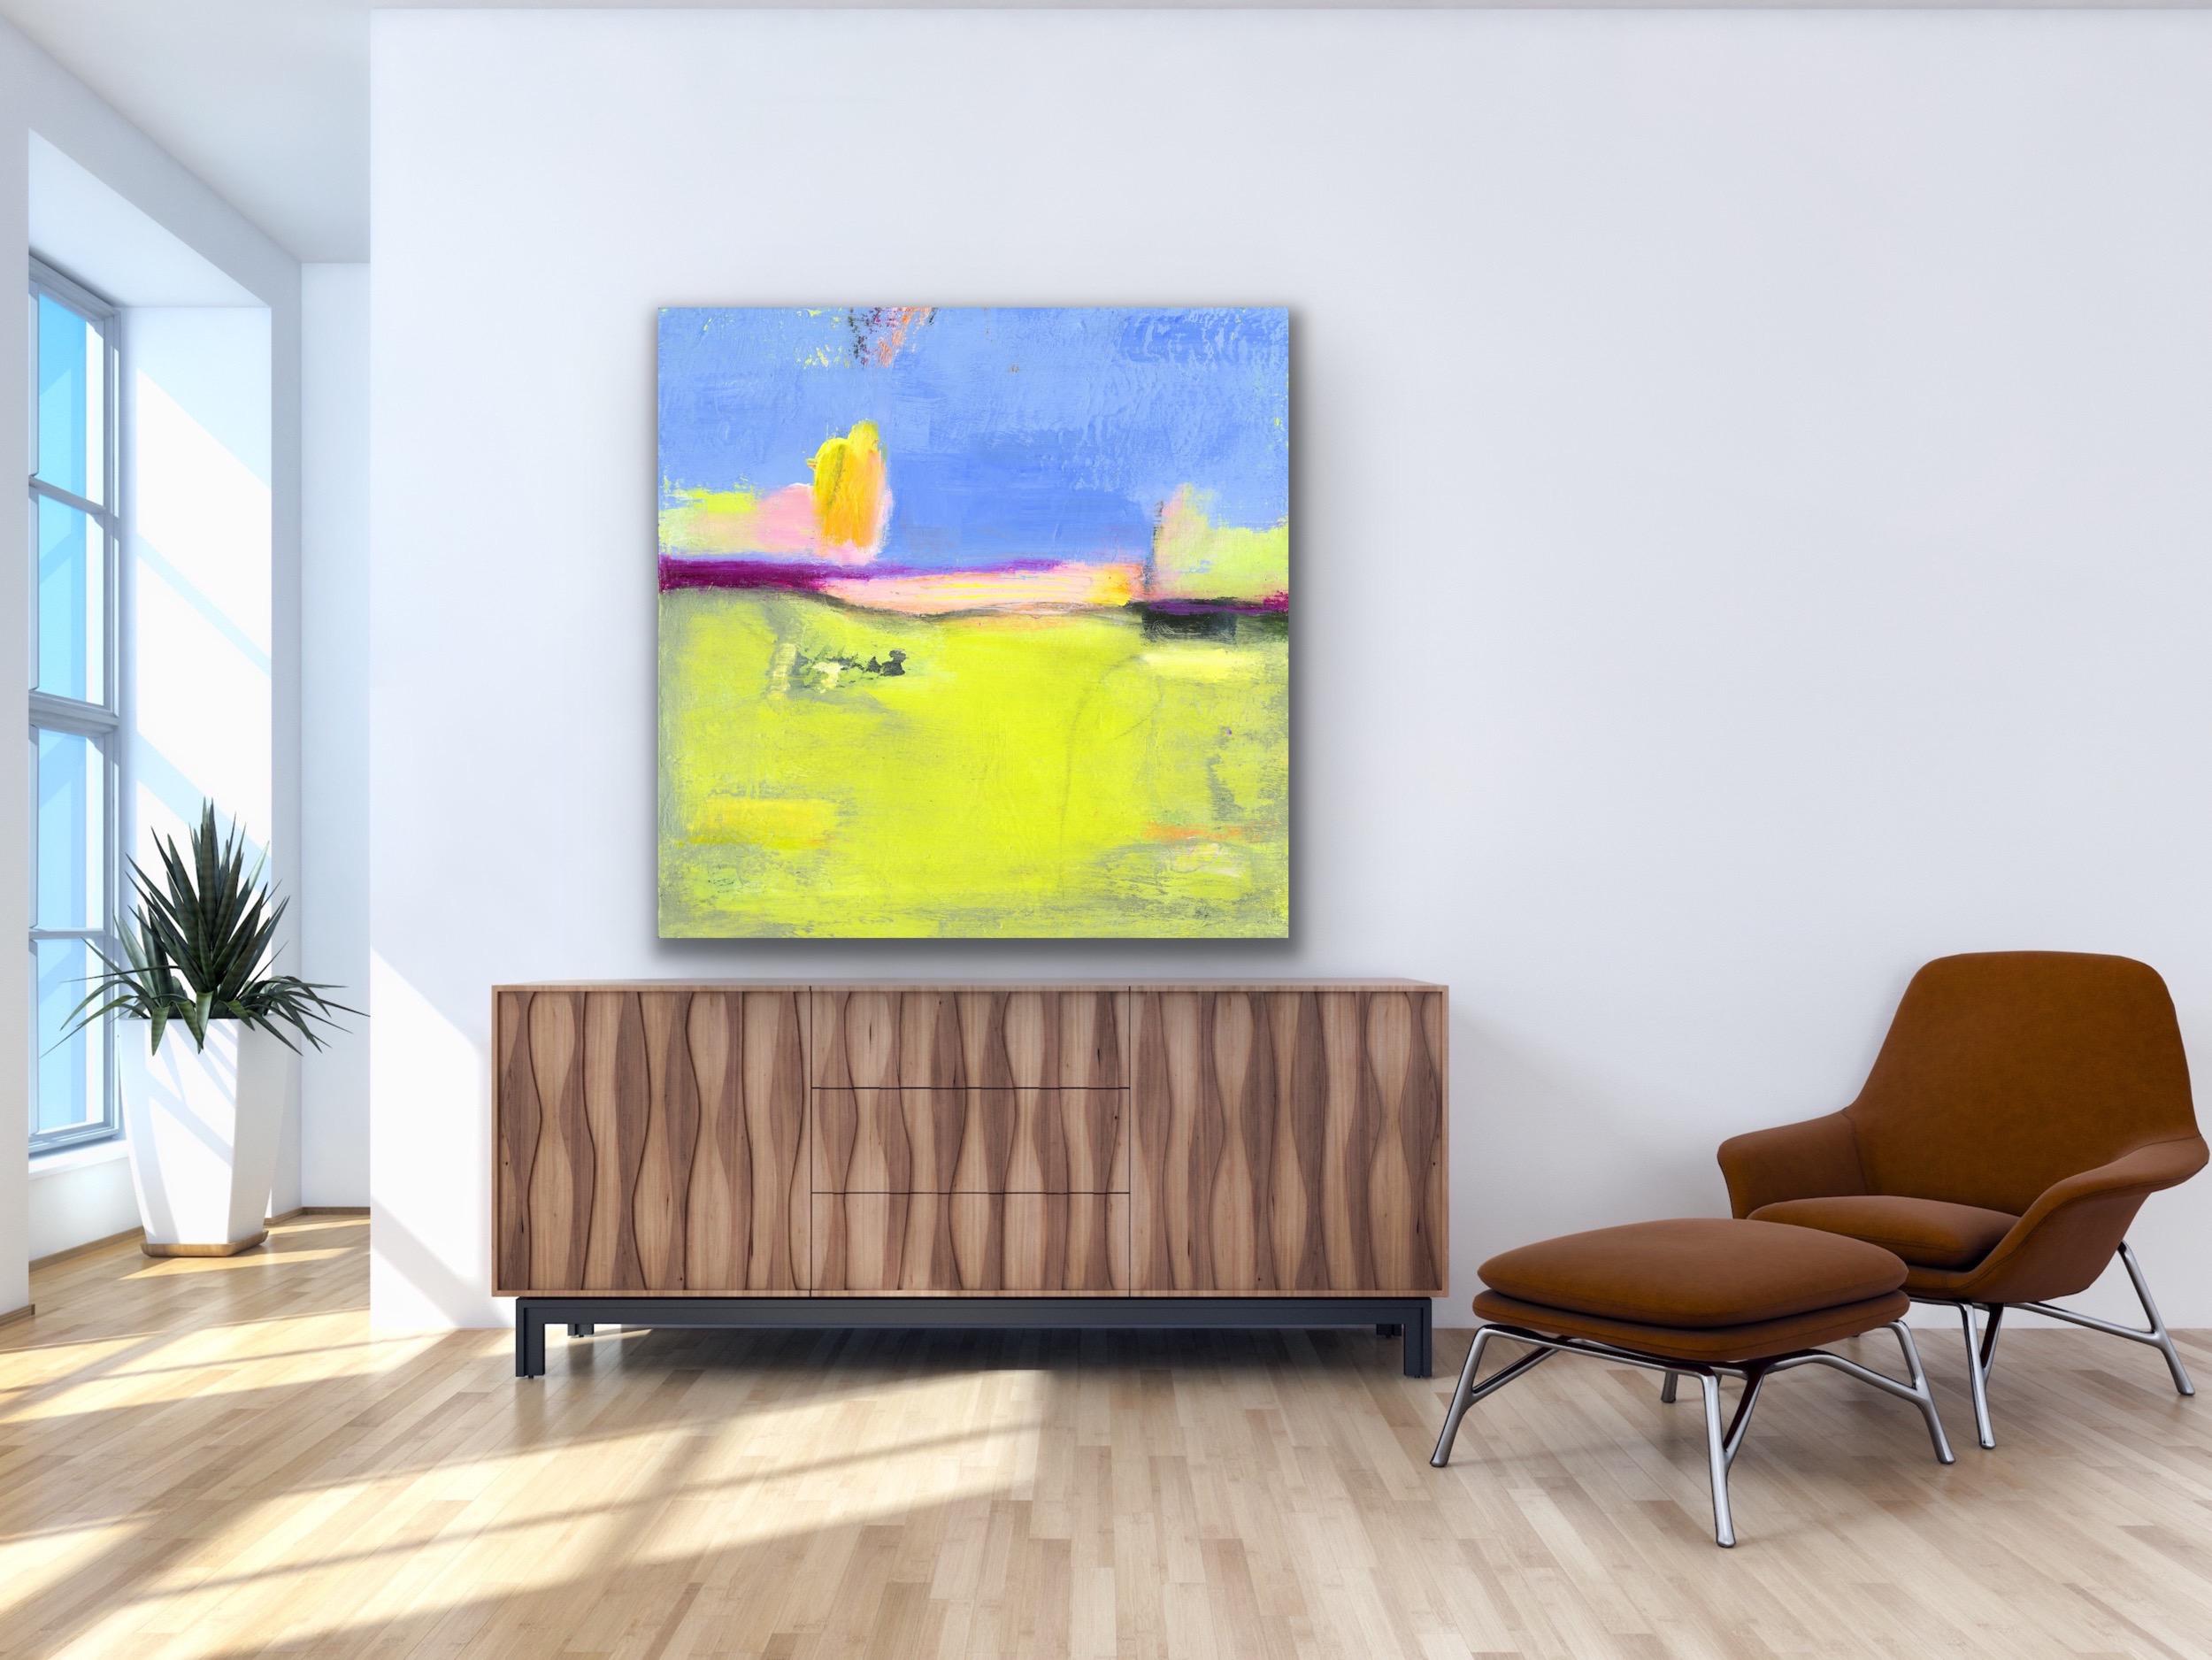 This is a limited edition print of Celeste Reiter's original painting and is signed by the artist.  Printed on lightweight metal composite, your artwork comes ready to hang. This vibrant composition can be hung both indoor and outdoor as it is